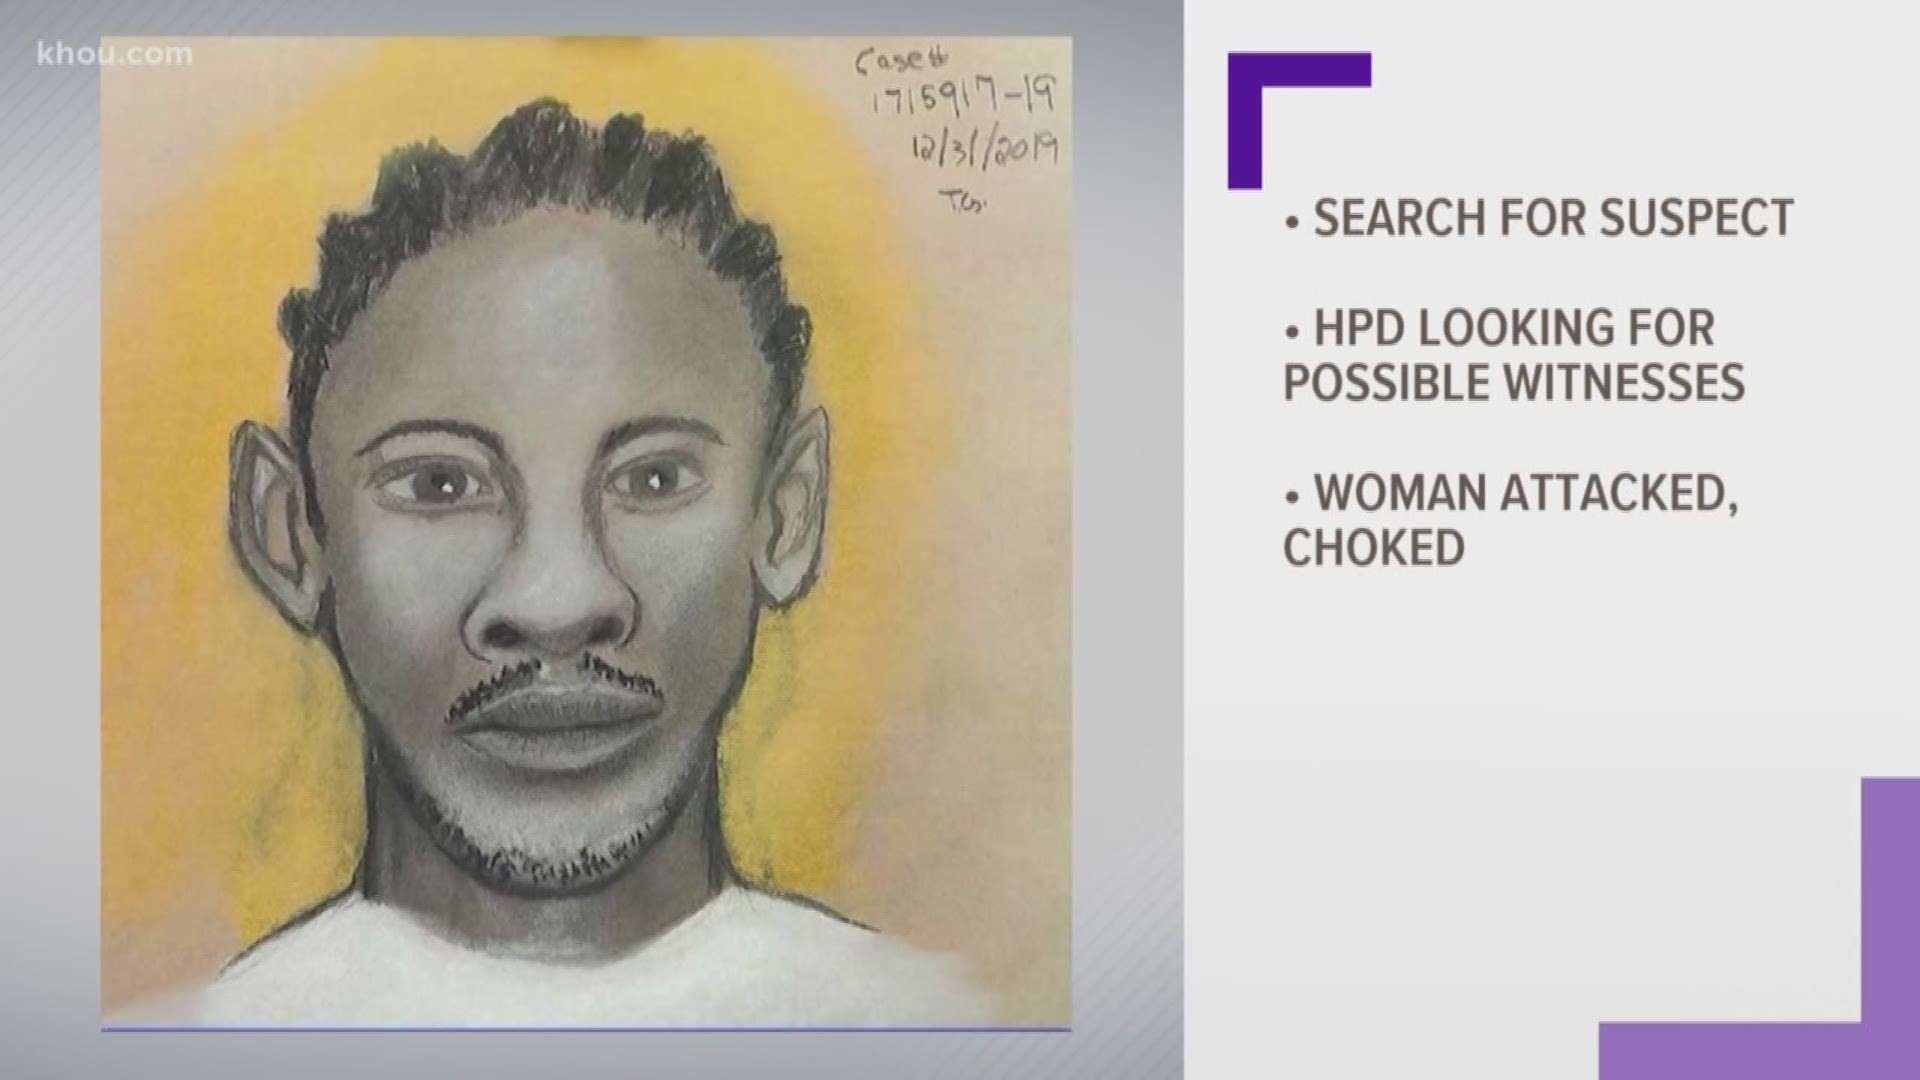 Houston police are looking for suspect and now a possible witness in a sexual near where a woman claims she was chocked, assaulted and robbed while walking home.